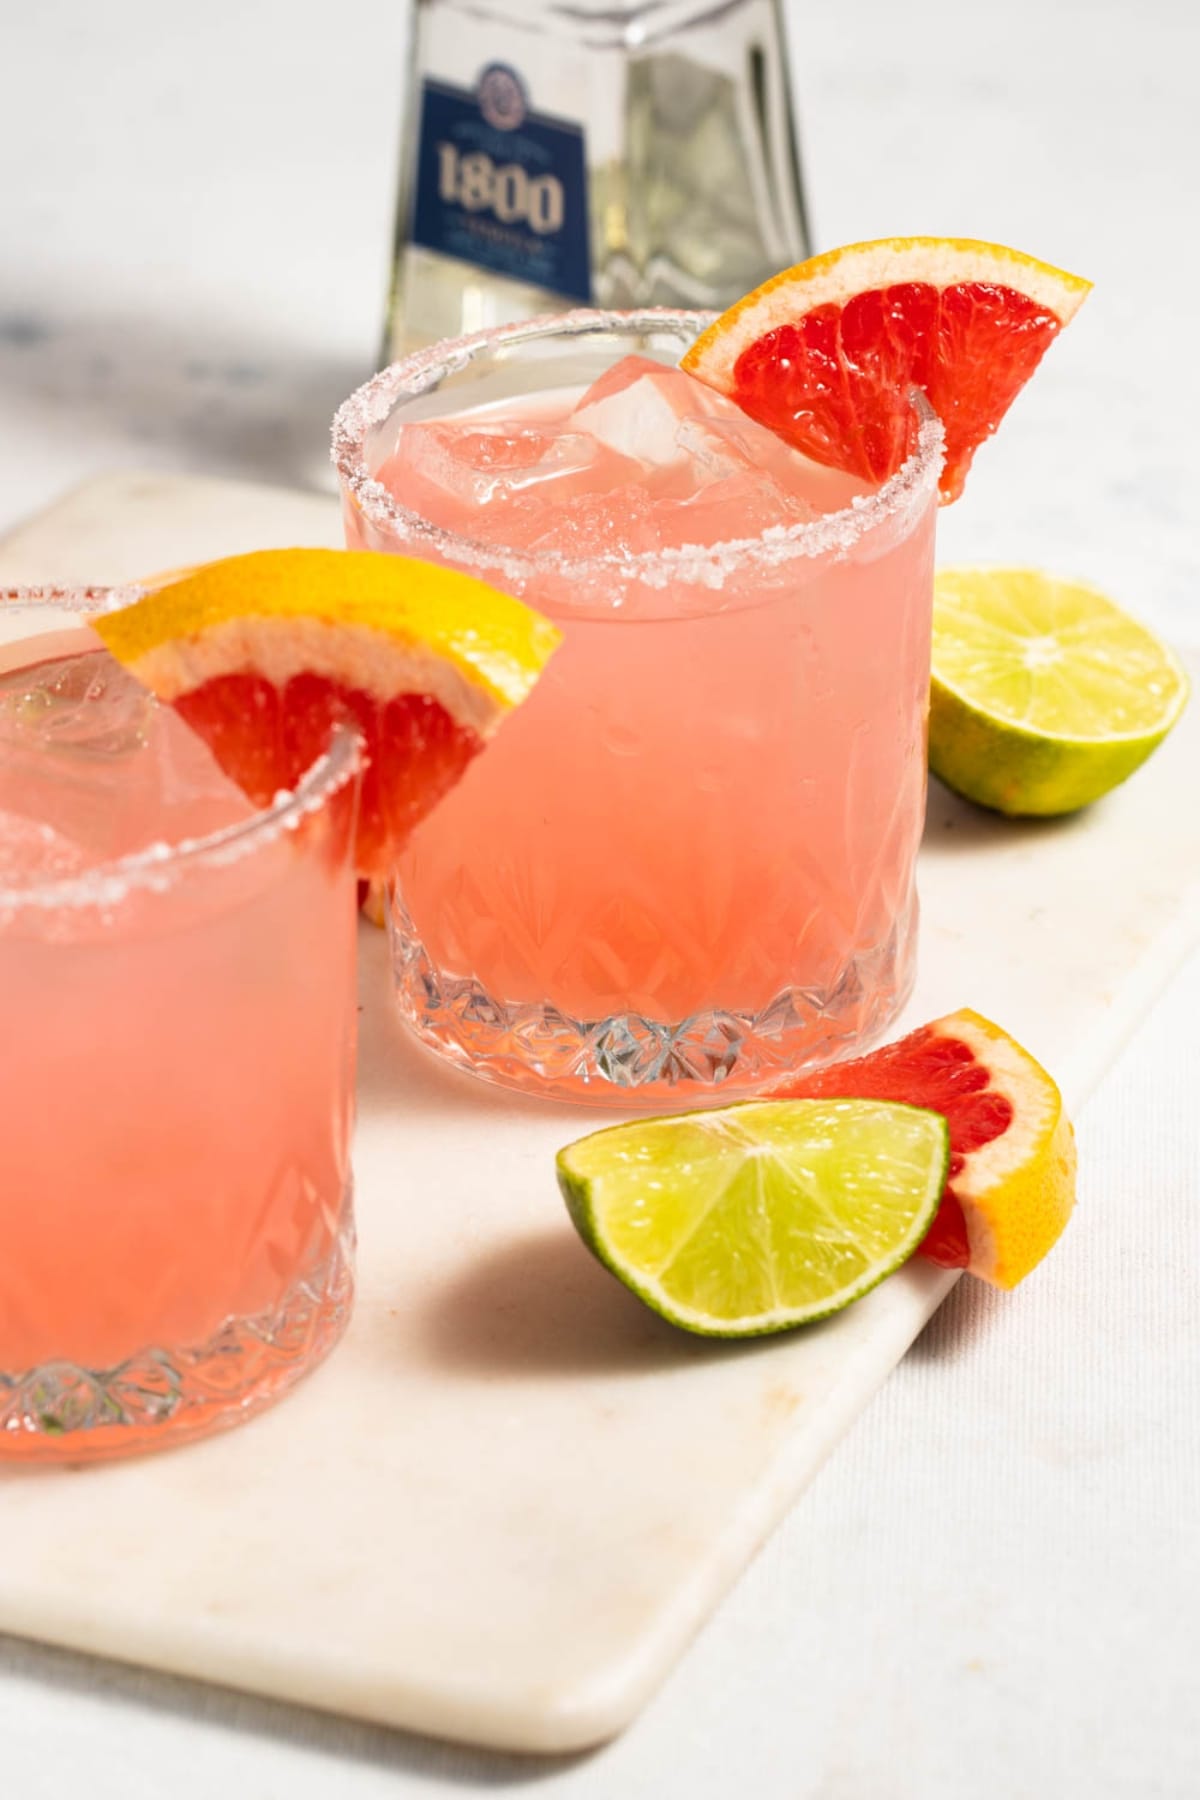 Homemade sweet and boozy paloma cocktail with grapefruit juice